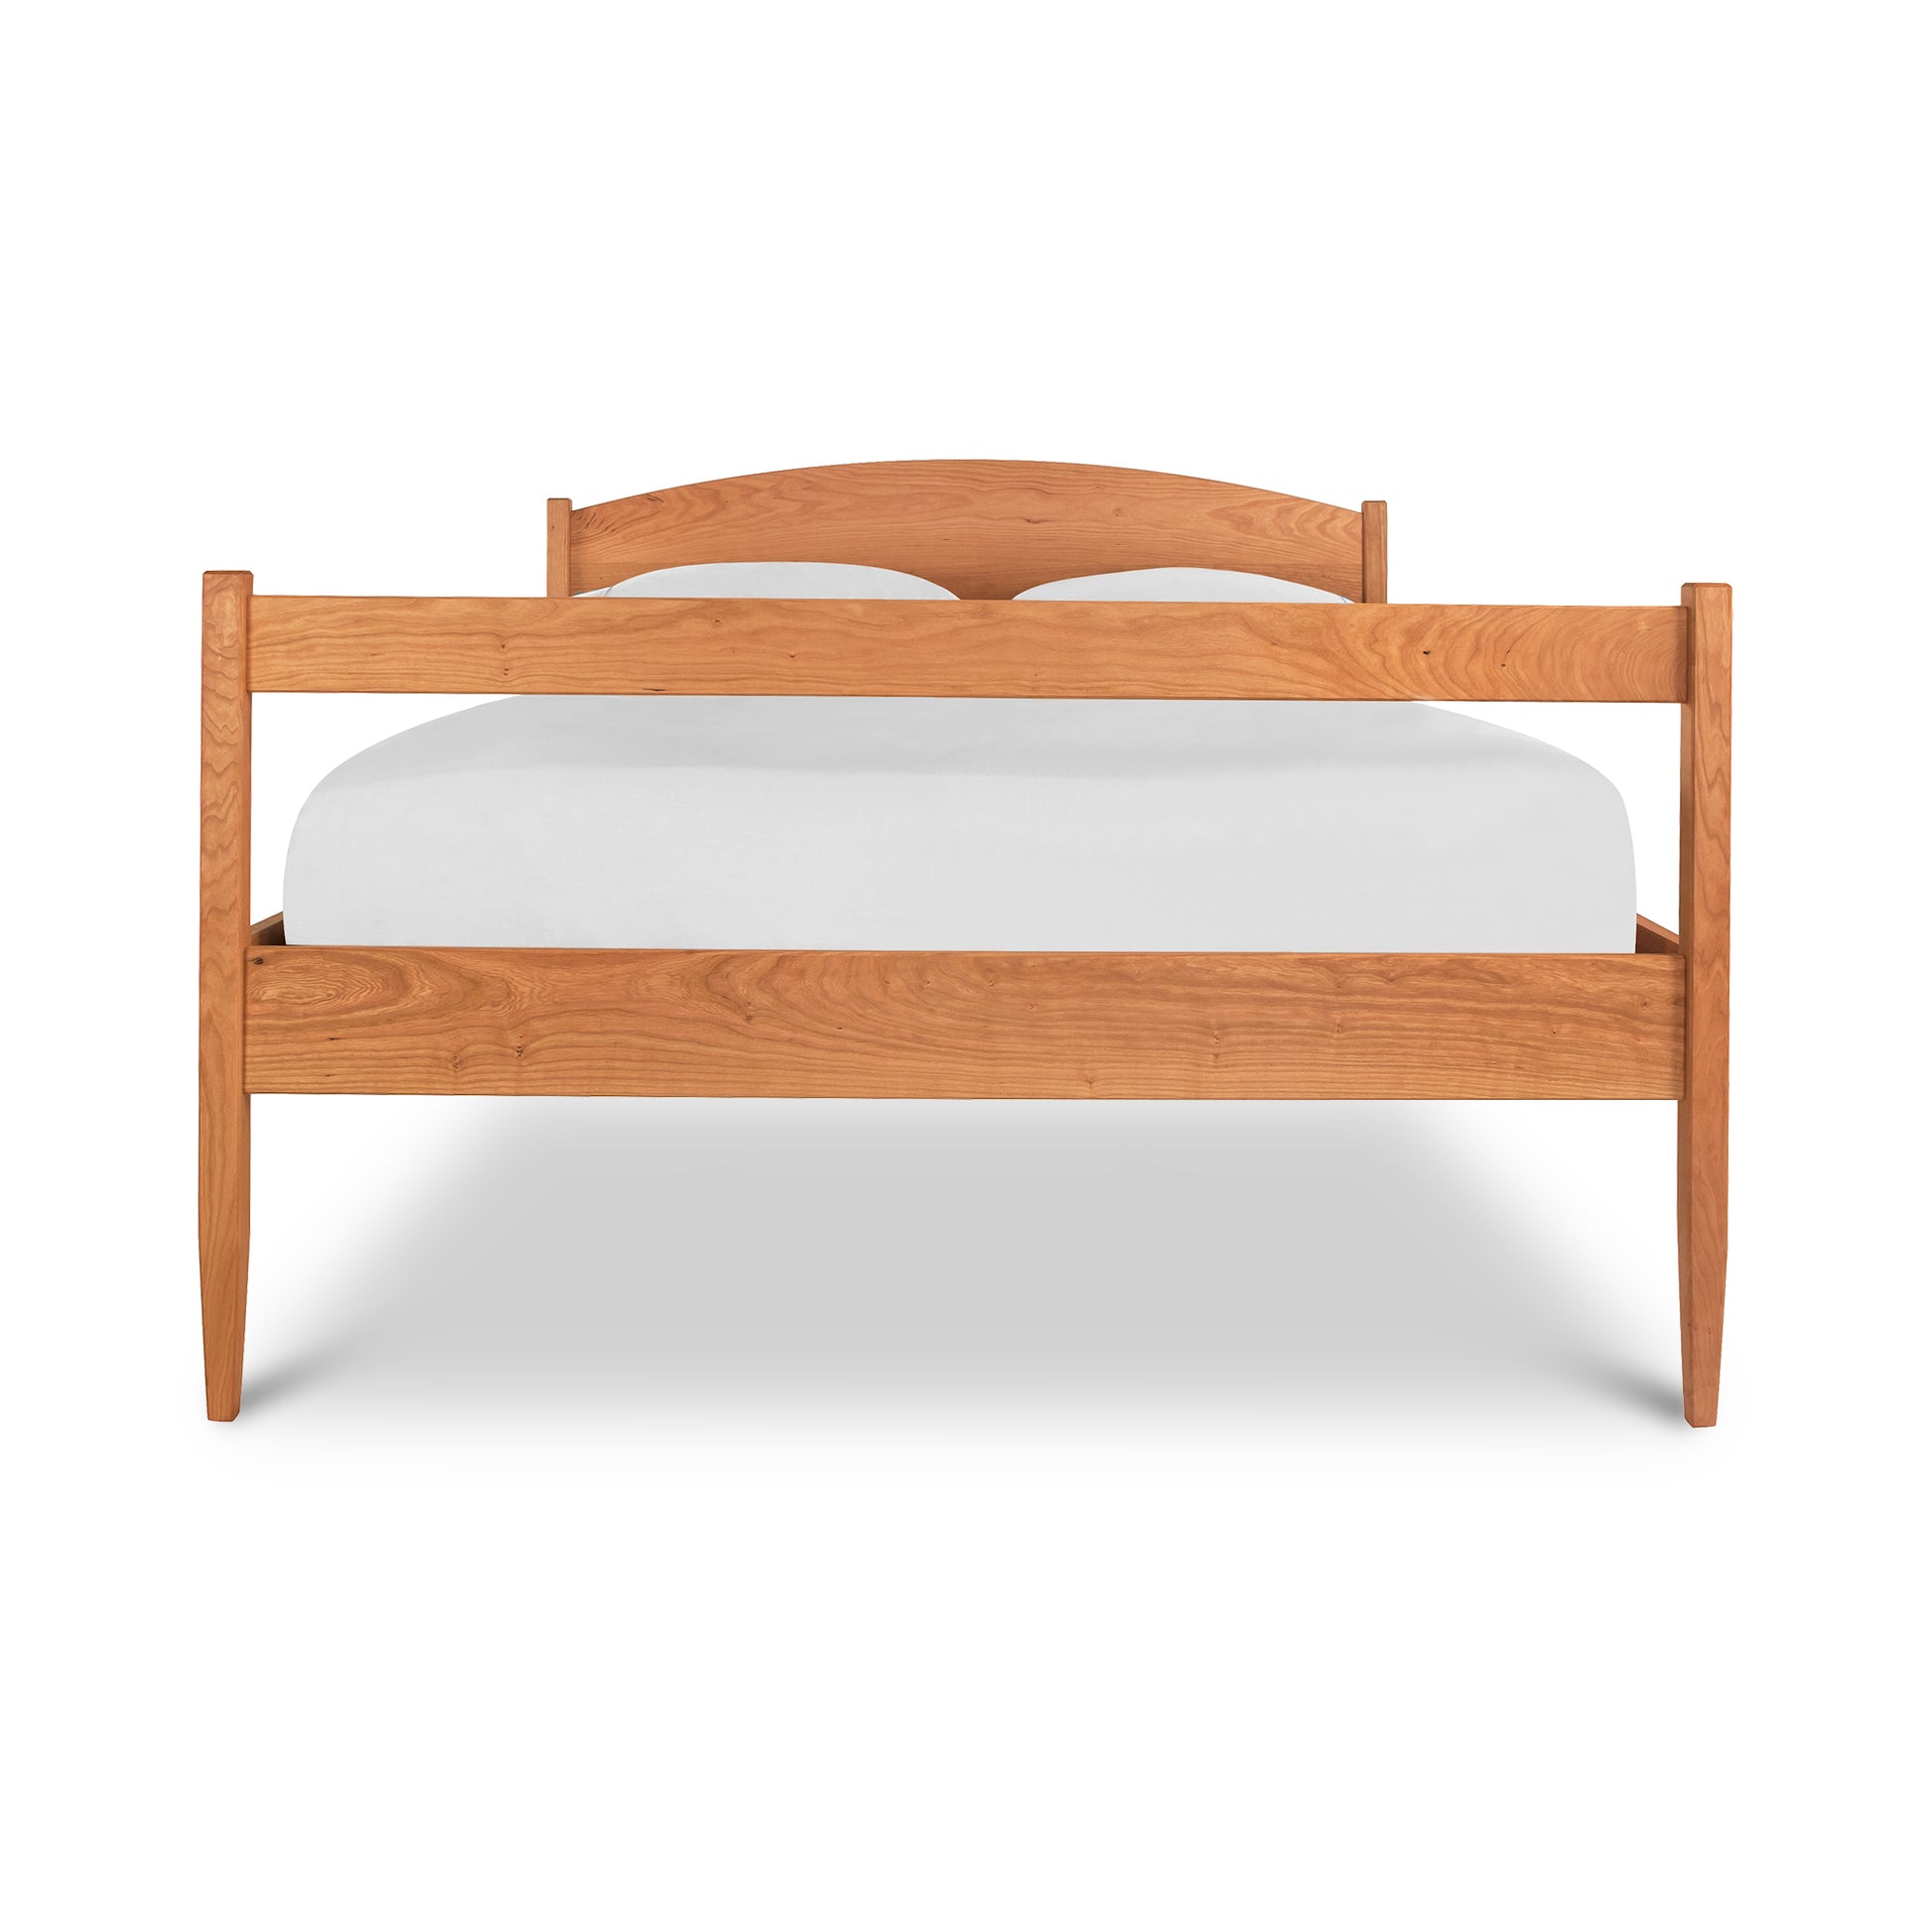 A wooden bed with a white headboard and footboard.